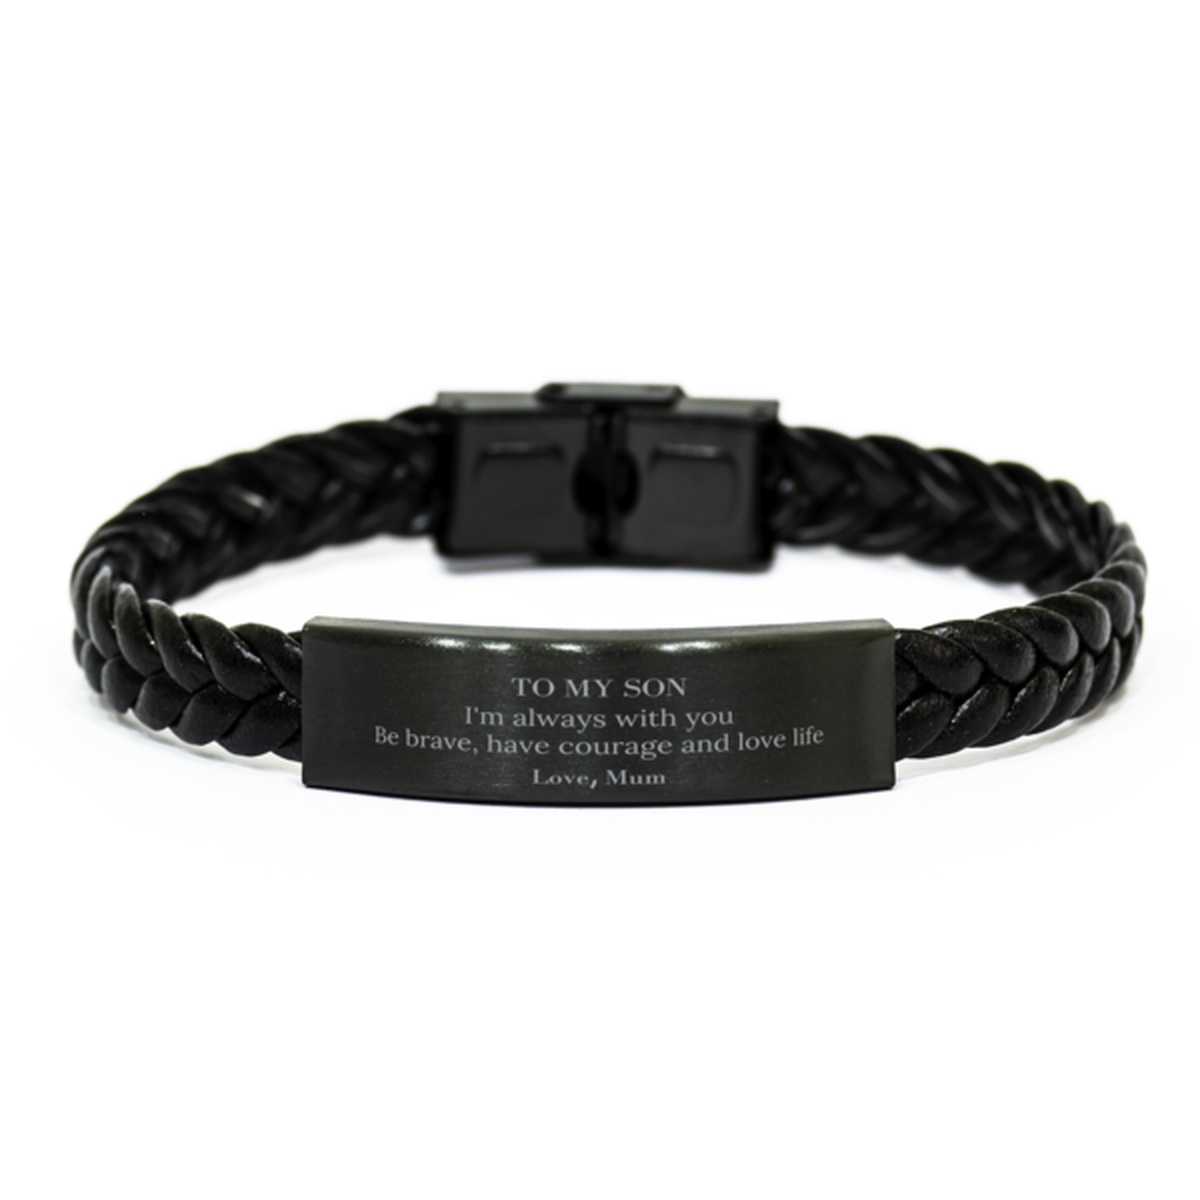 To My Son Gifts from Mum, Unique Braided Leather Bracelet Inspirational Christmas Birthday Graduation Gifts for Son I'm always with you. Be brave, have courage and love life. Love, Mum